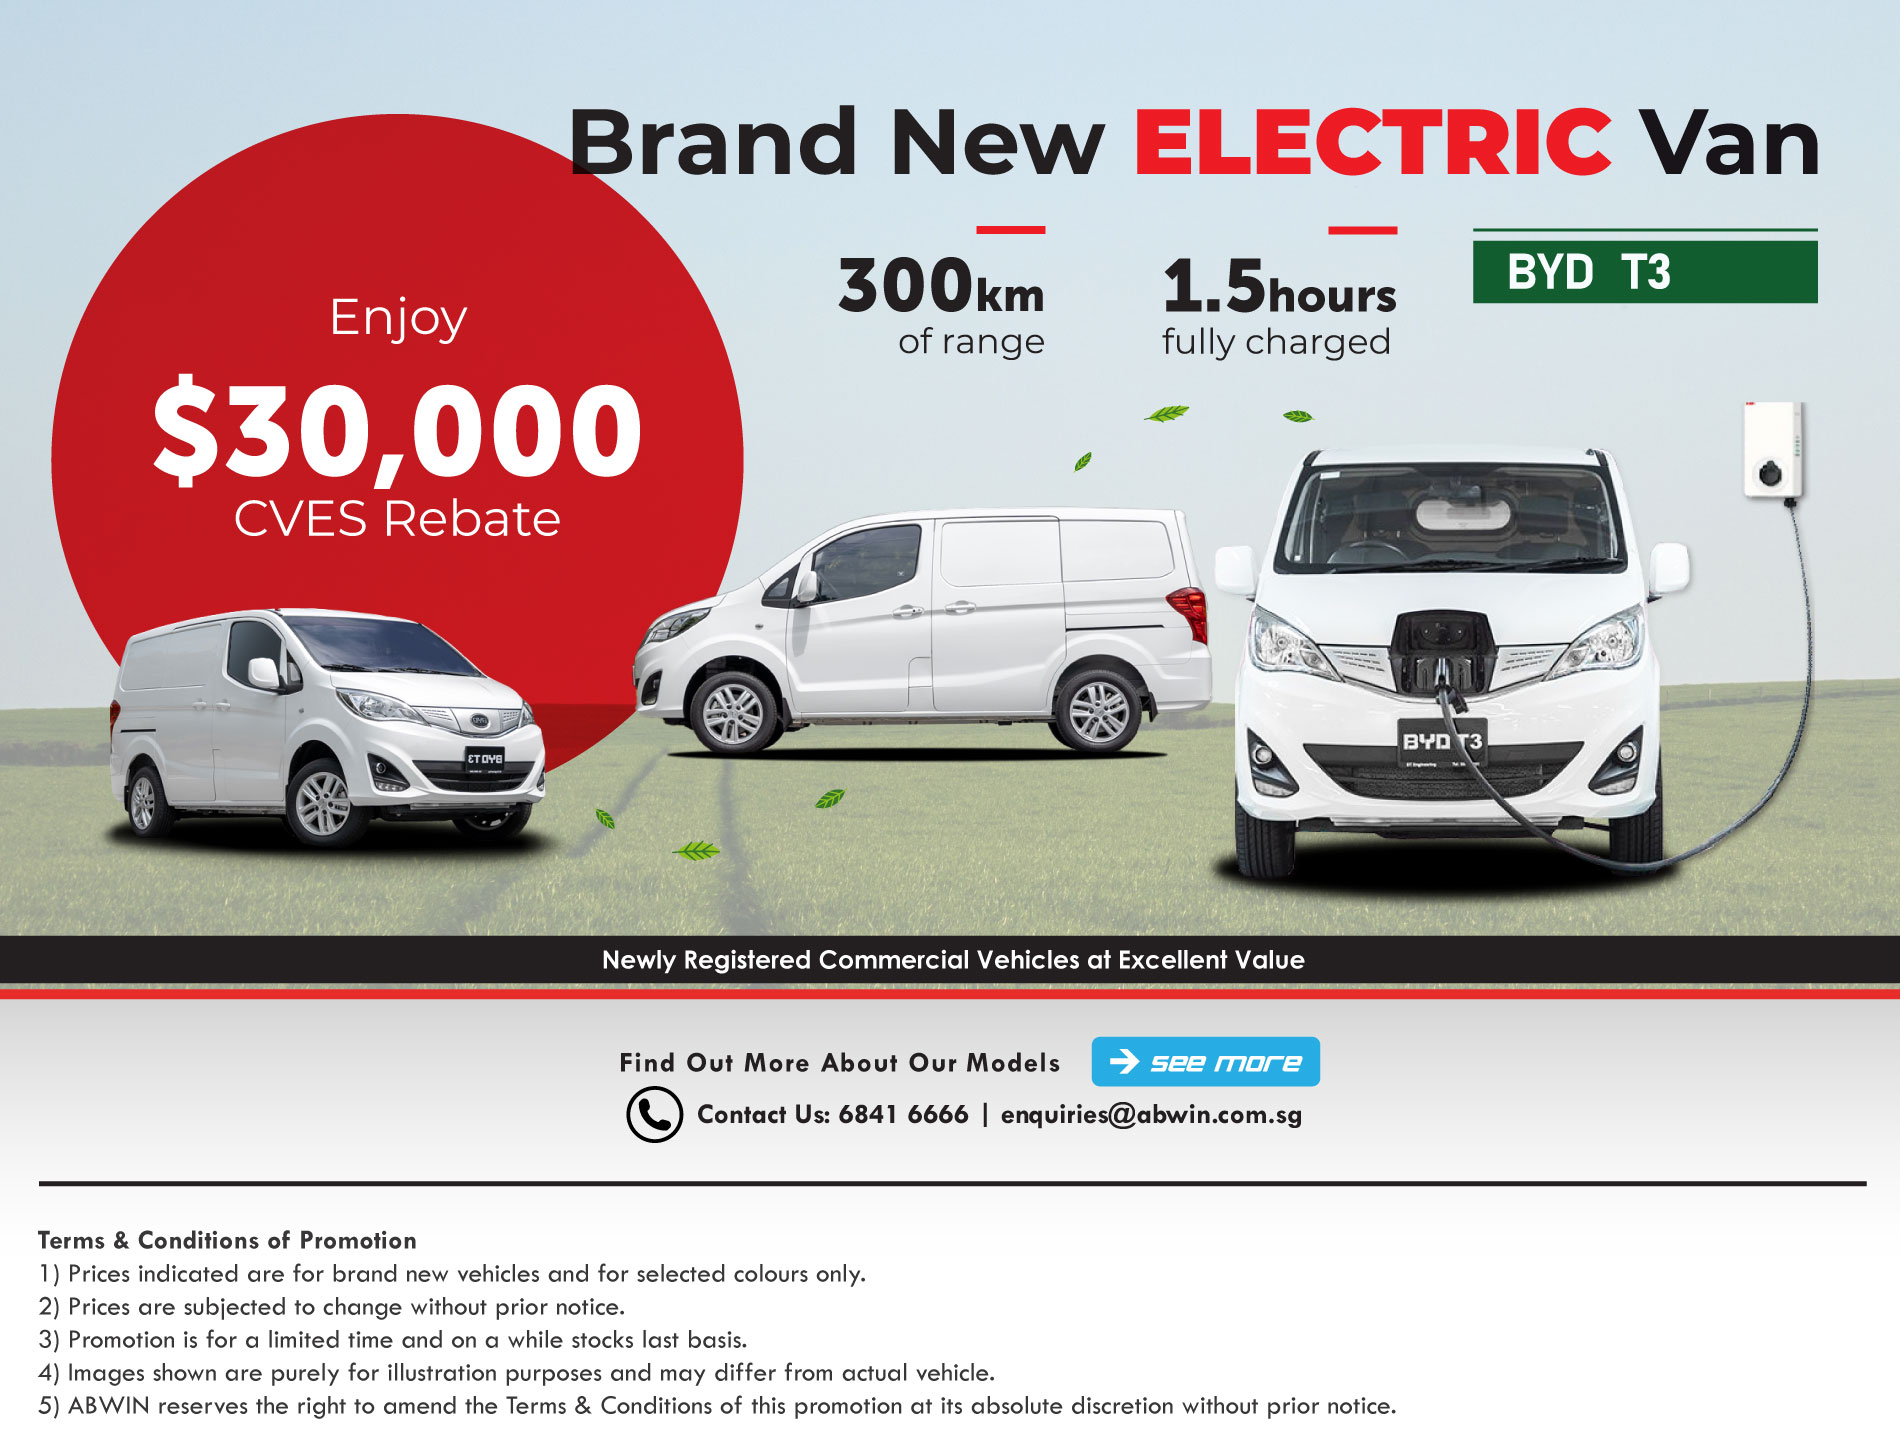 Brand New Electric Van for Sales in Singapore